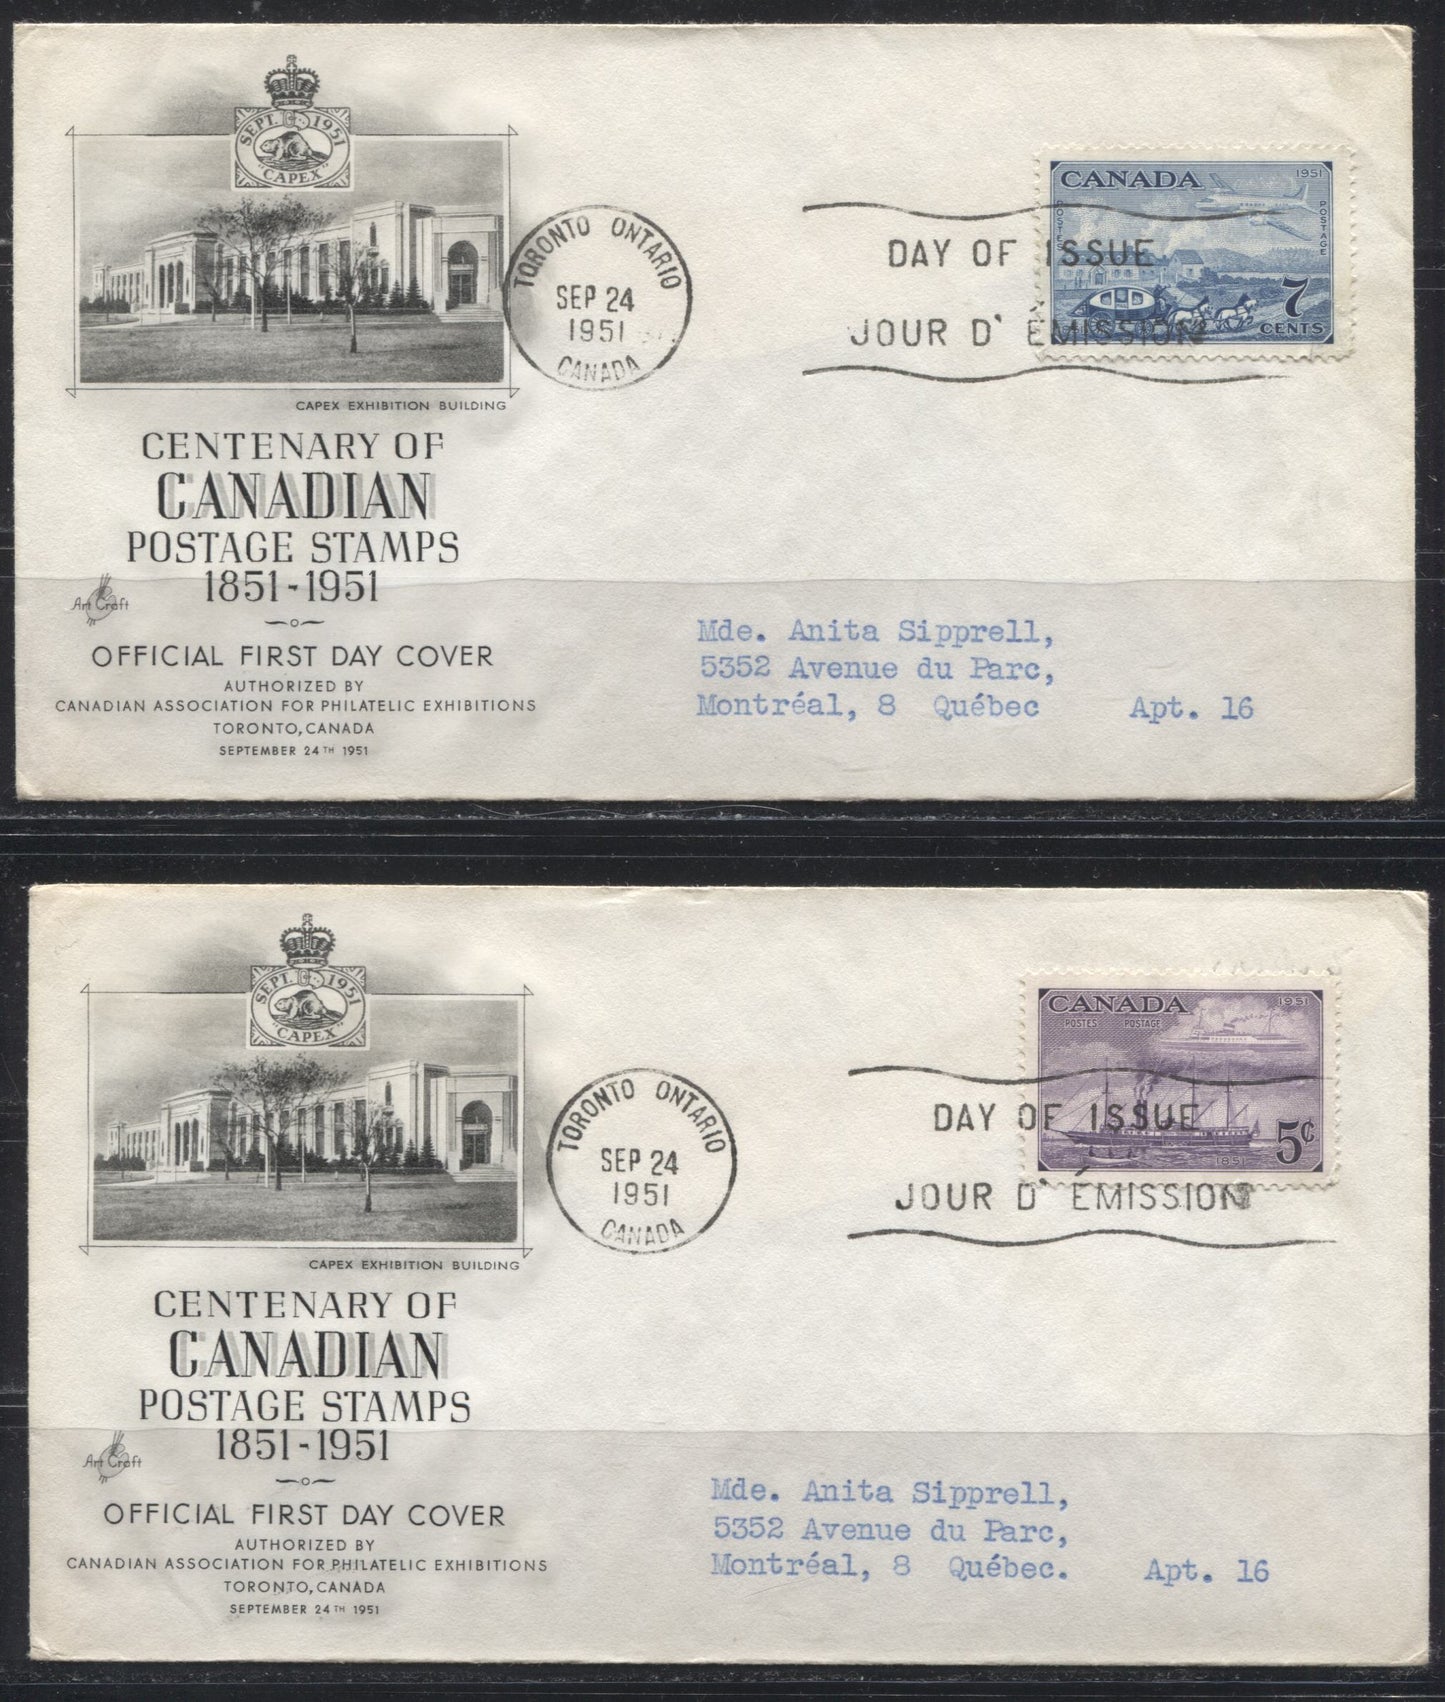 1951 CAPEX Issue - A Complete Set of Artcraft FDC's Plus 2 Additional Cachets - 6 Covers in Total